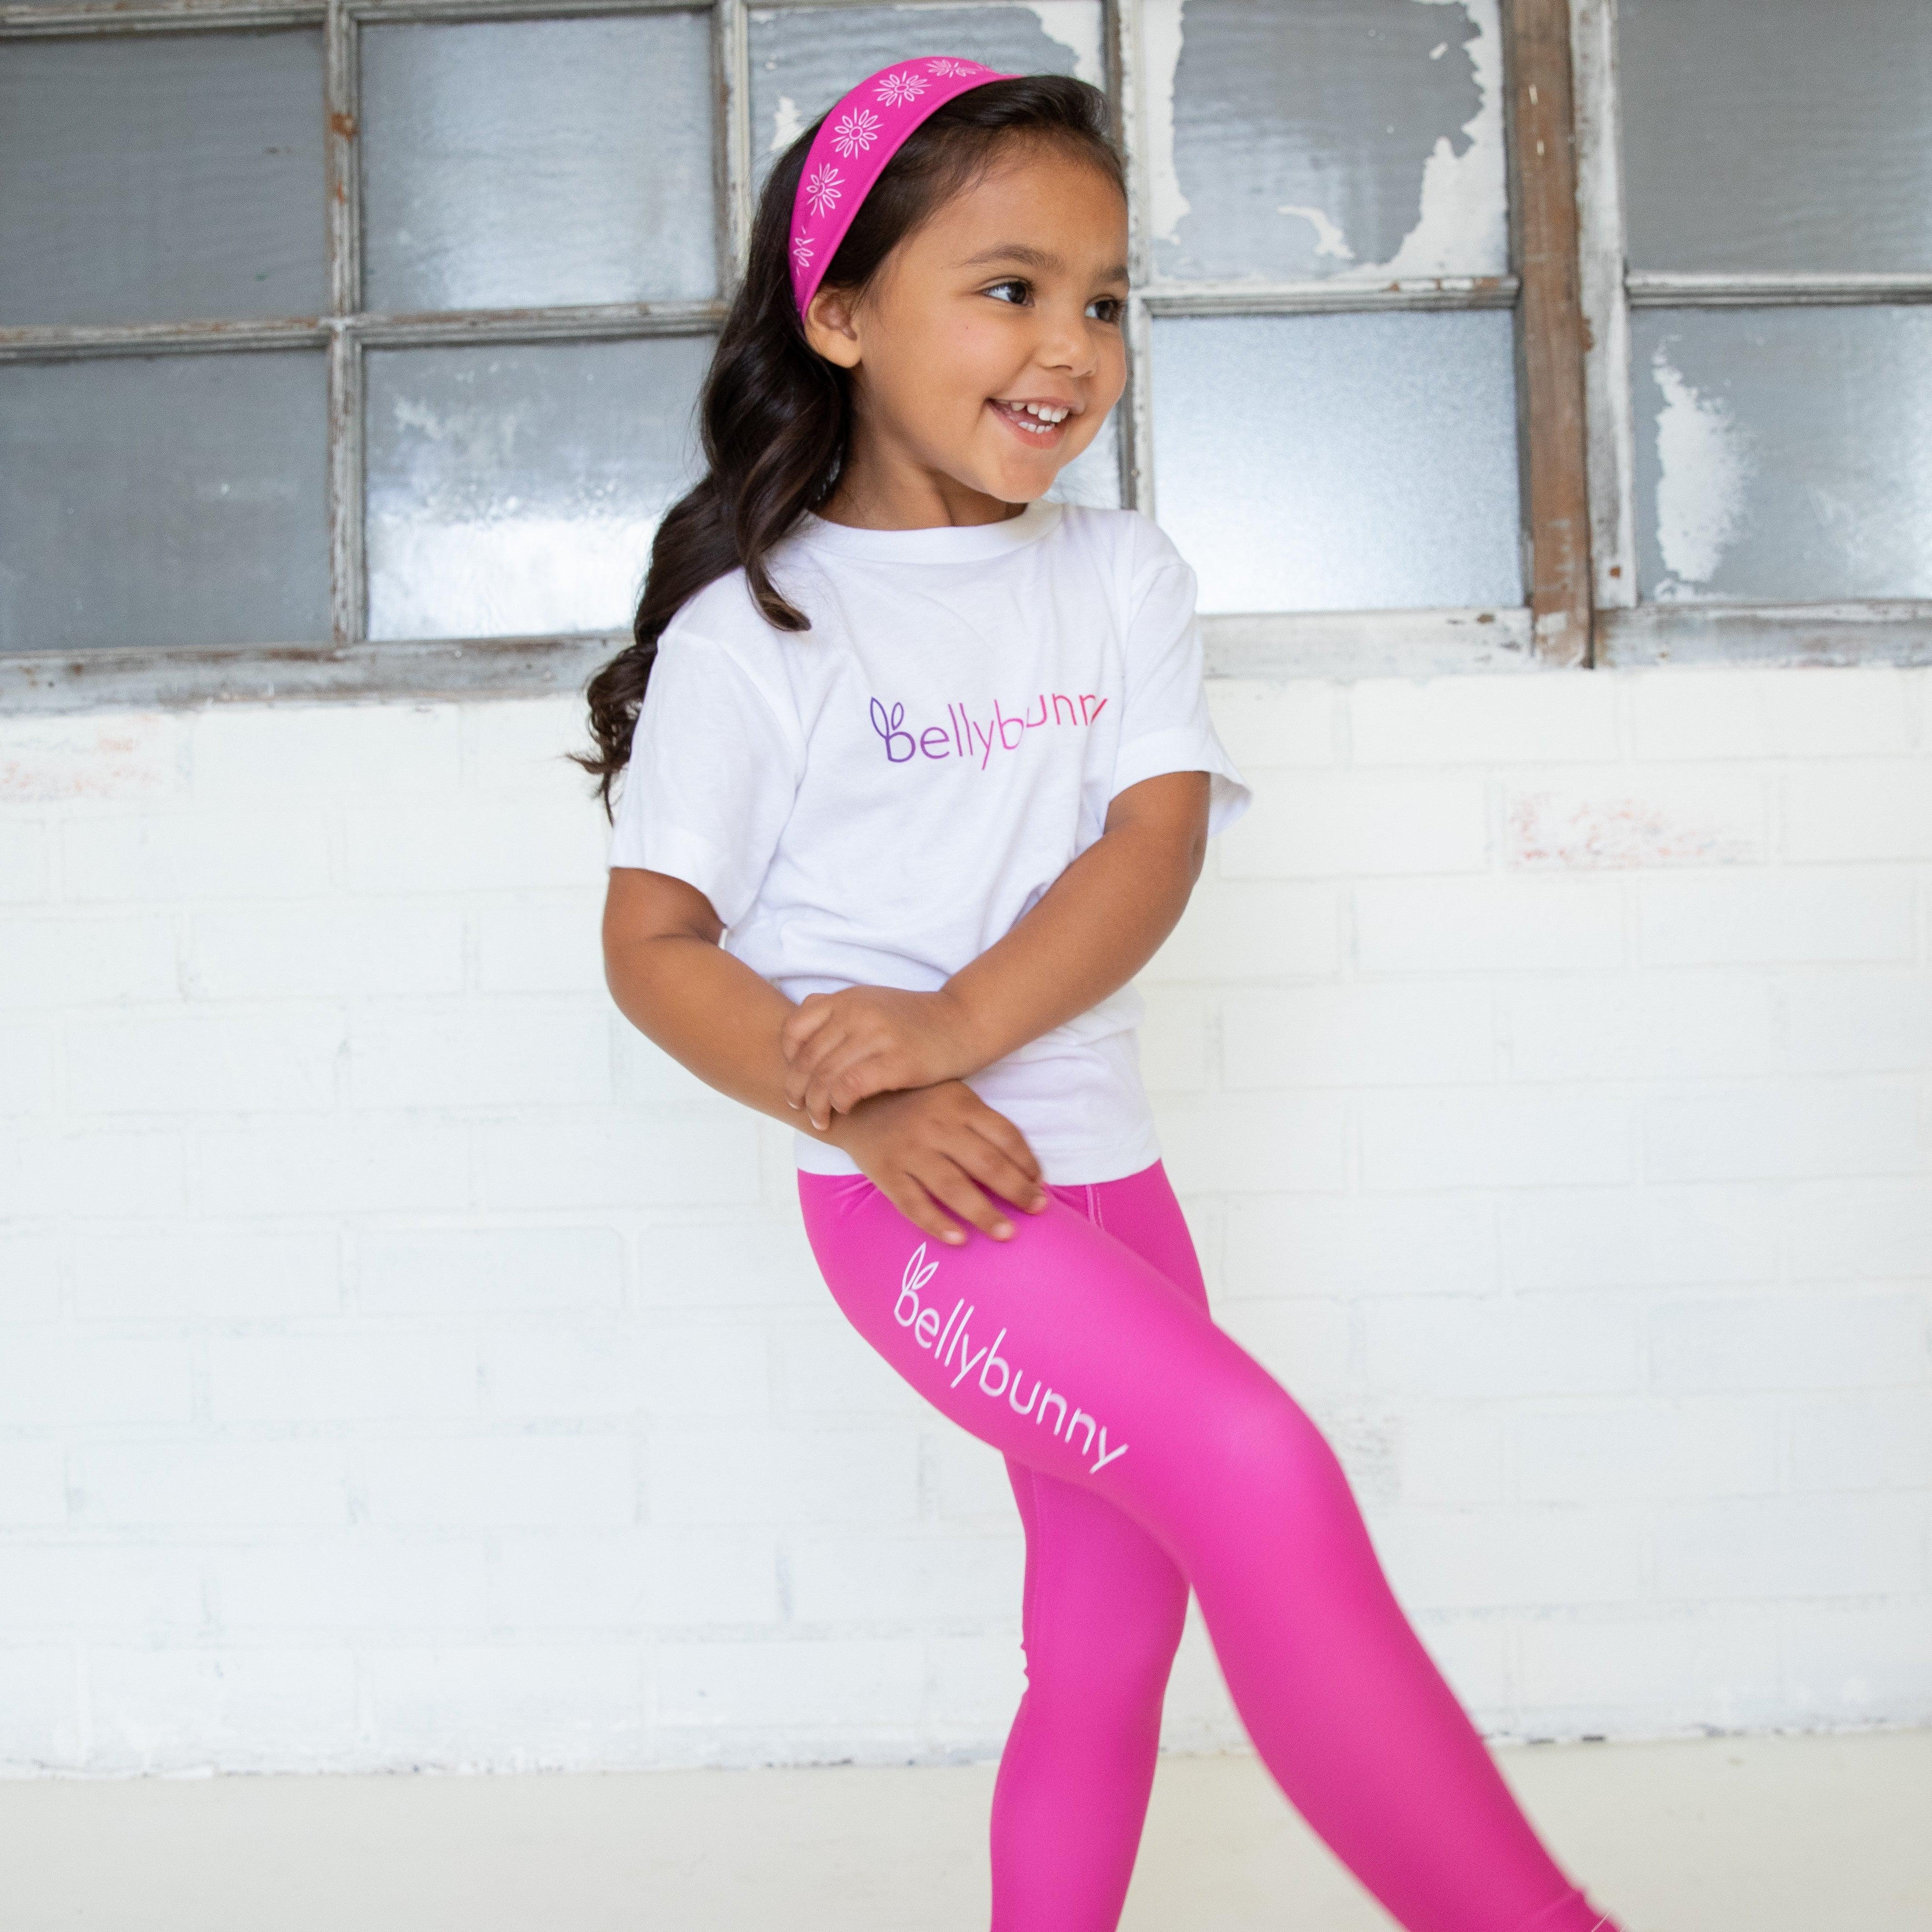 Country Kids Tights and Capris / Leggings - Girls bottoms